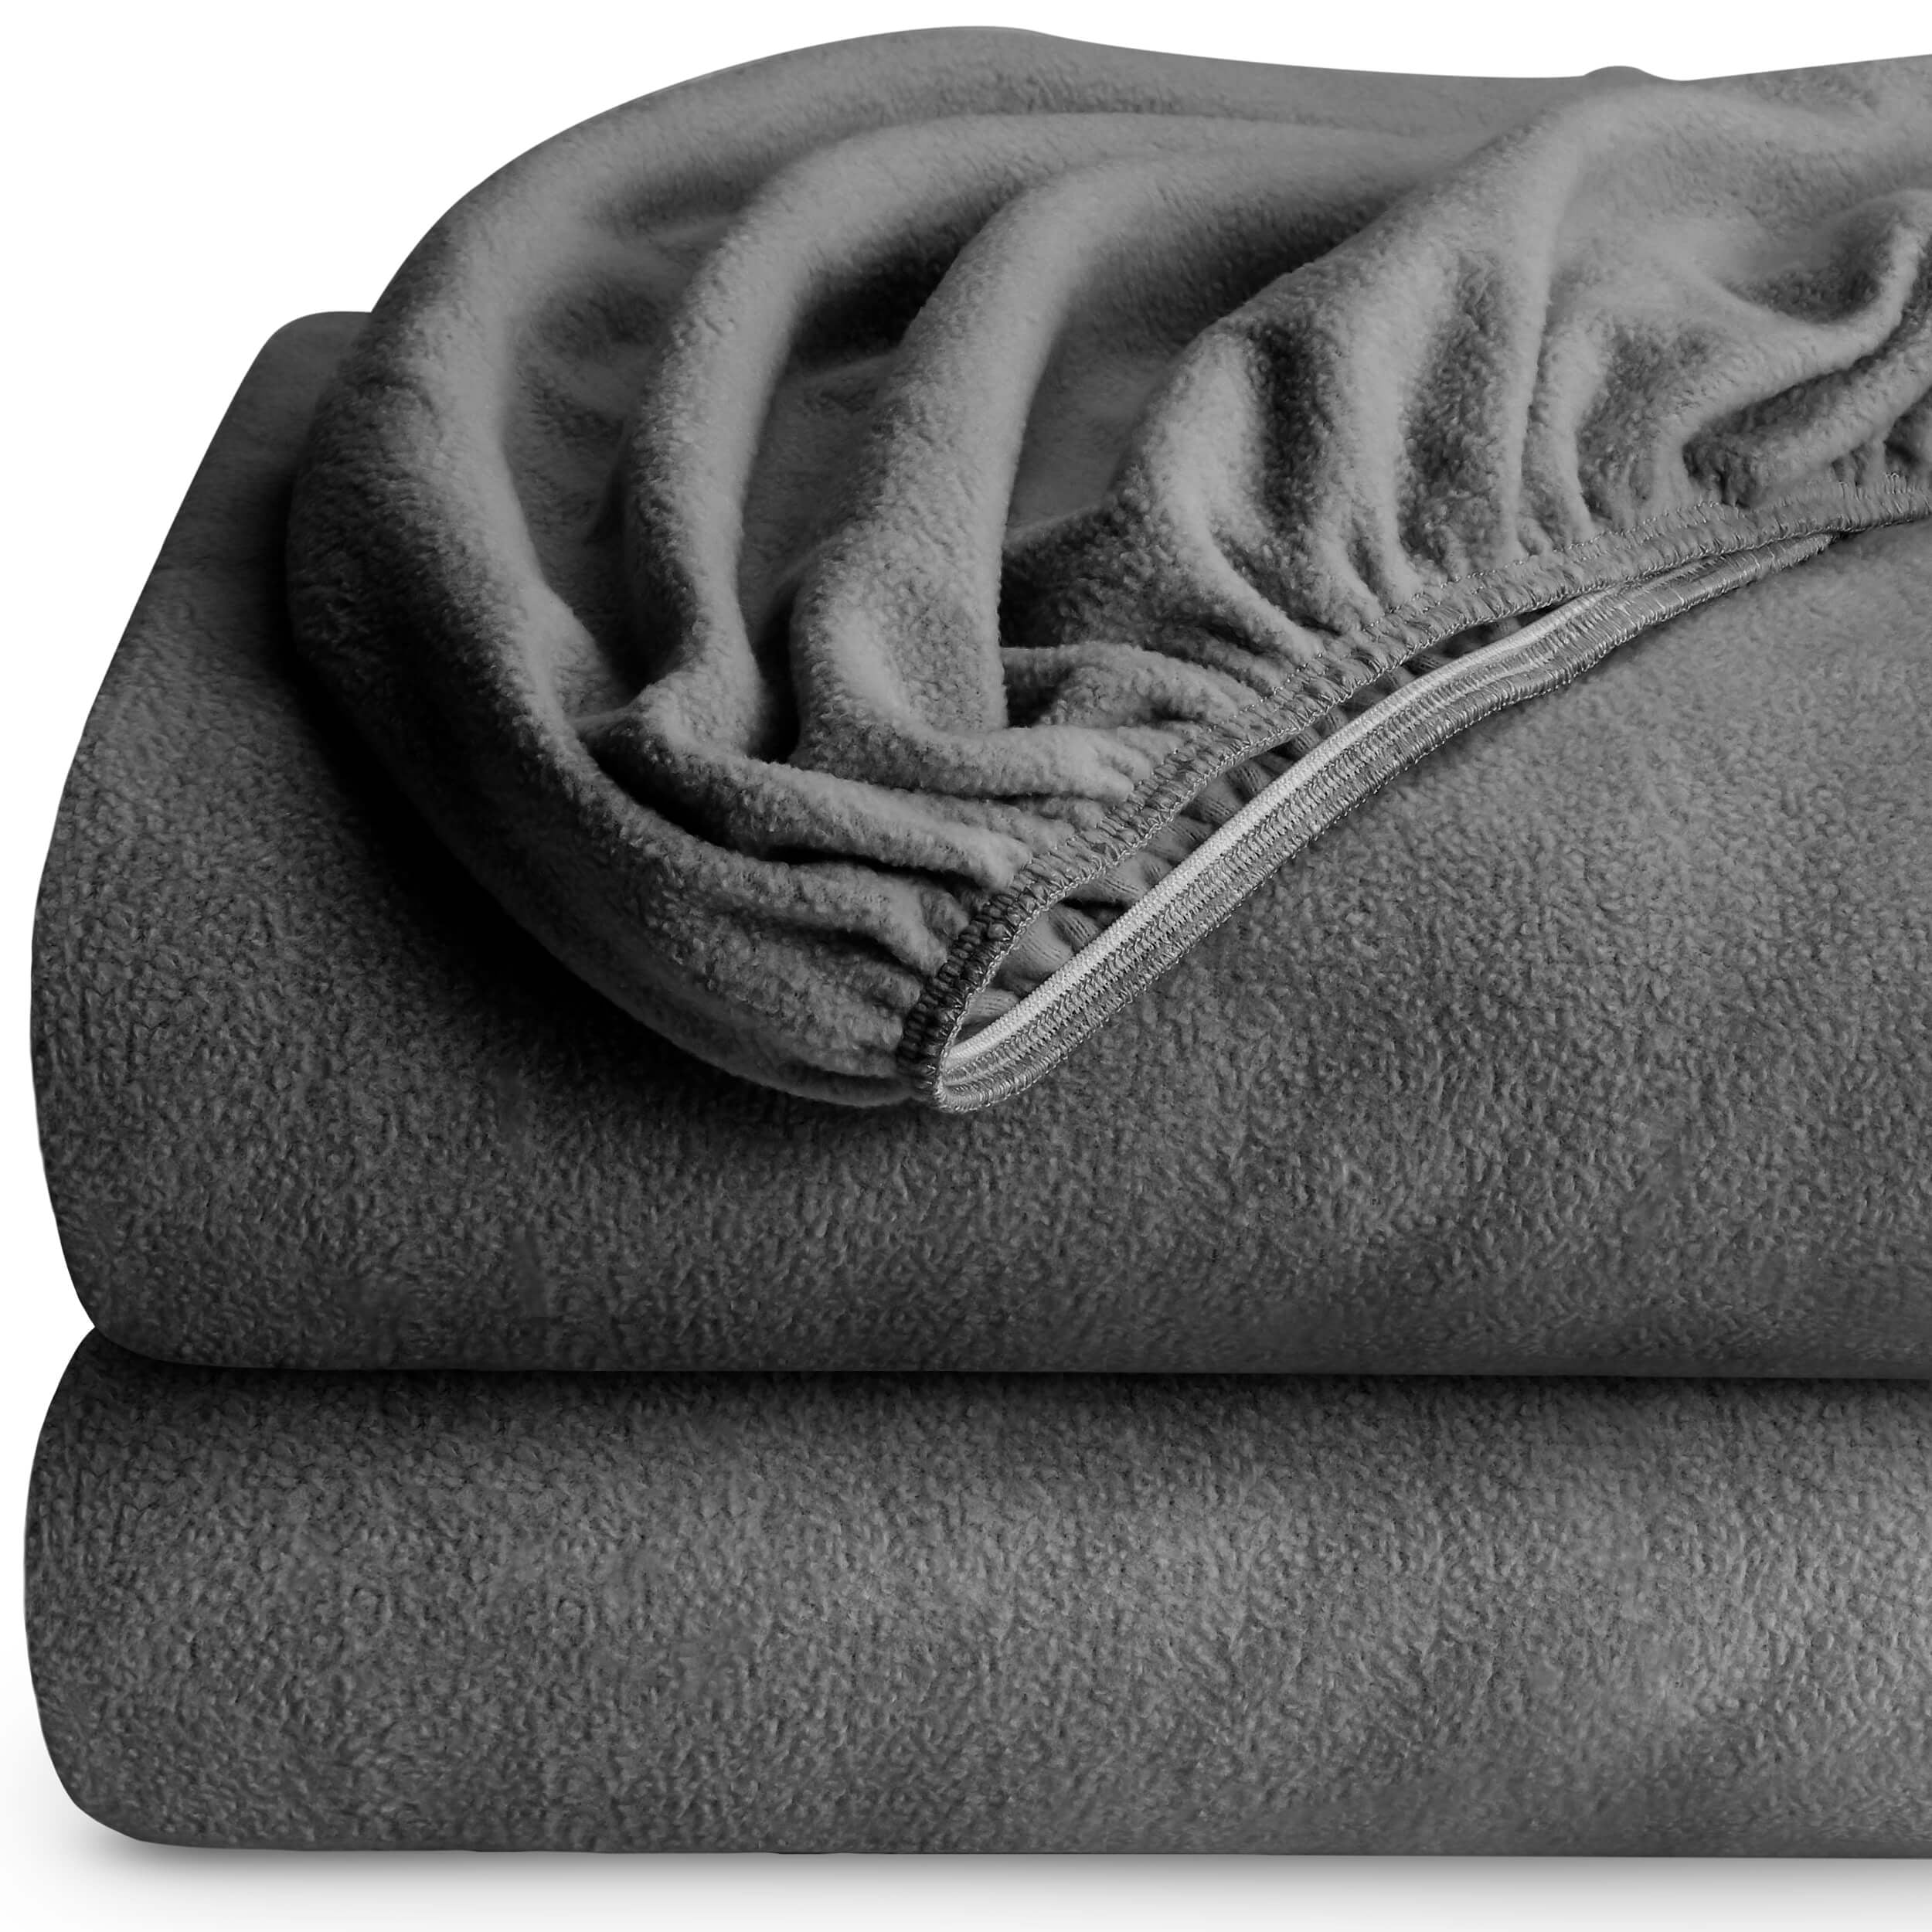 Queen Size Queen, White Deep Pocket Breathable /& Hypoallergenic Bare Home Super Soft Fleece Fitted Sheet 2 Pack - Extra Plush Polar Fleece All Season Cozy Warmth Pill Resistant